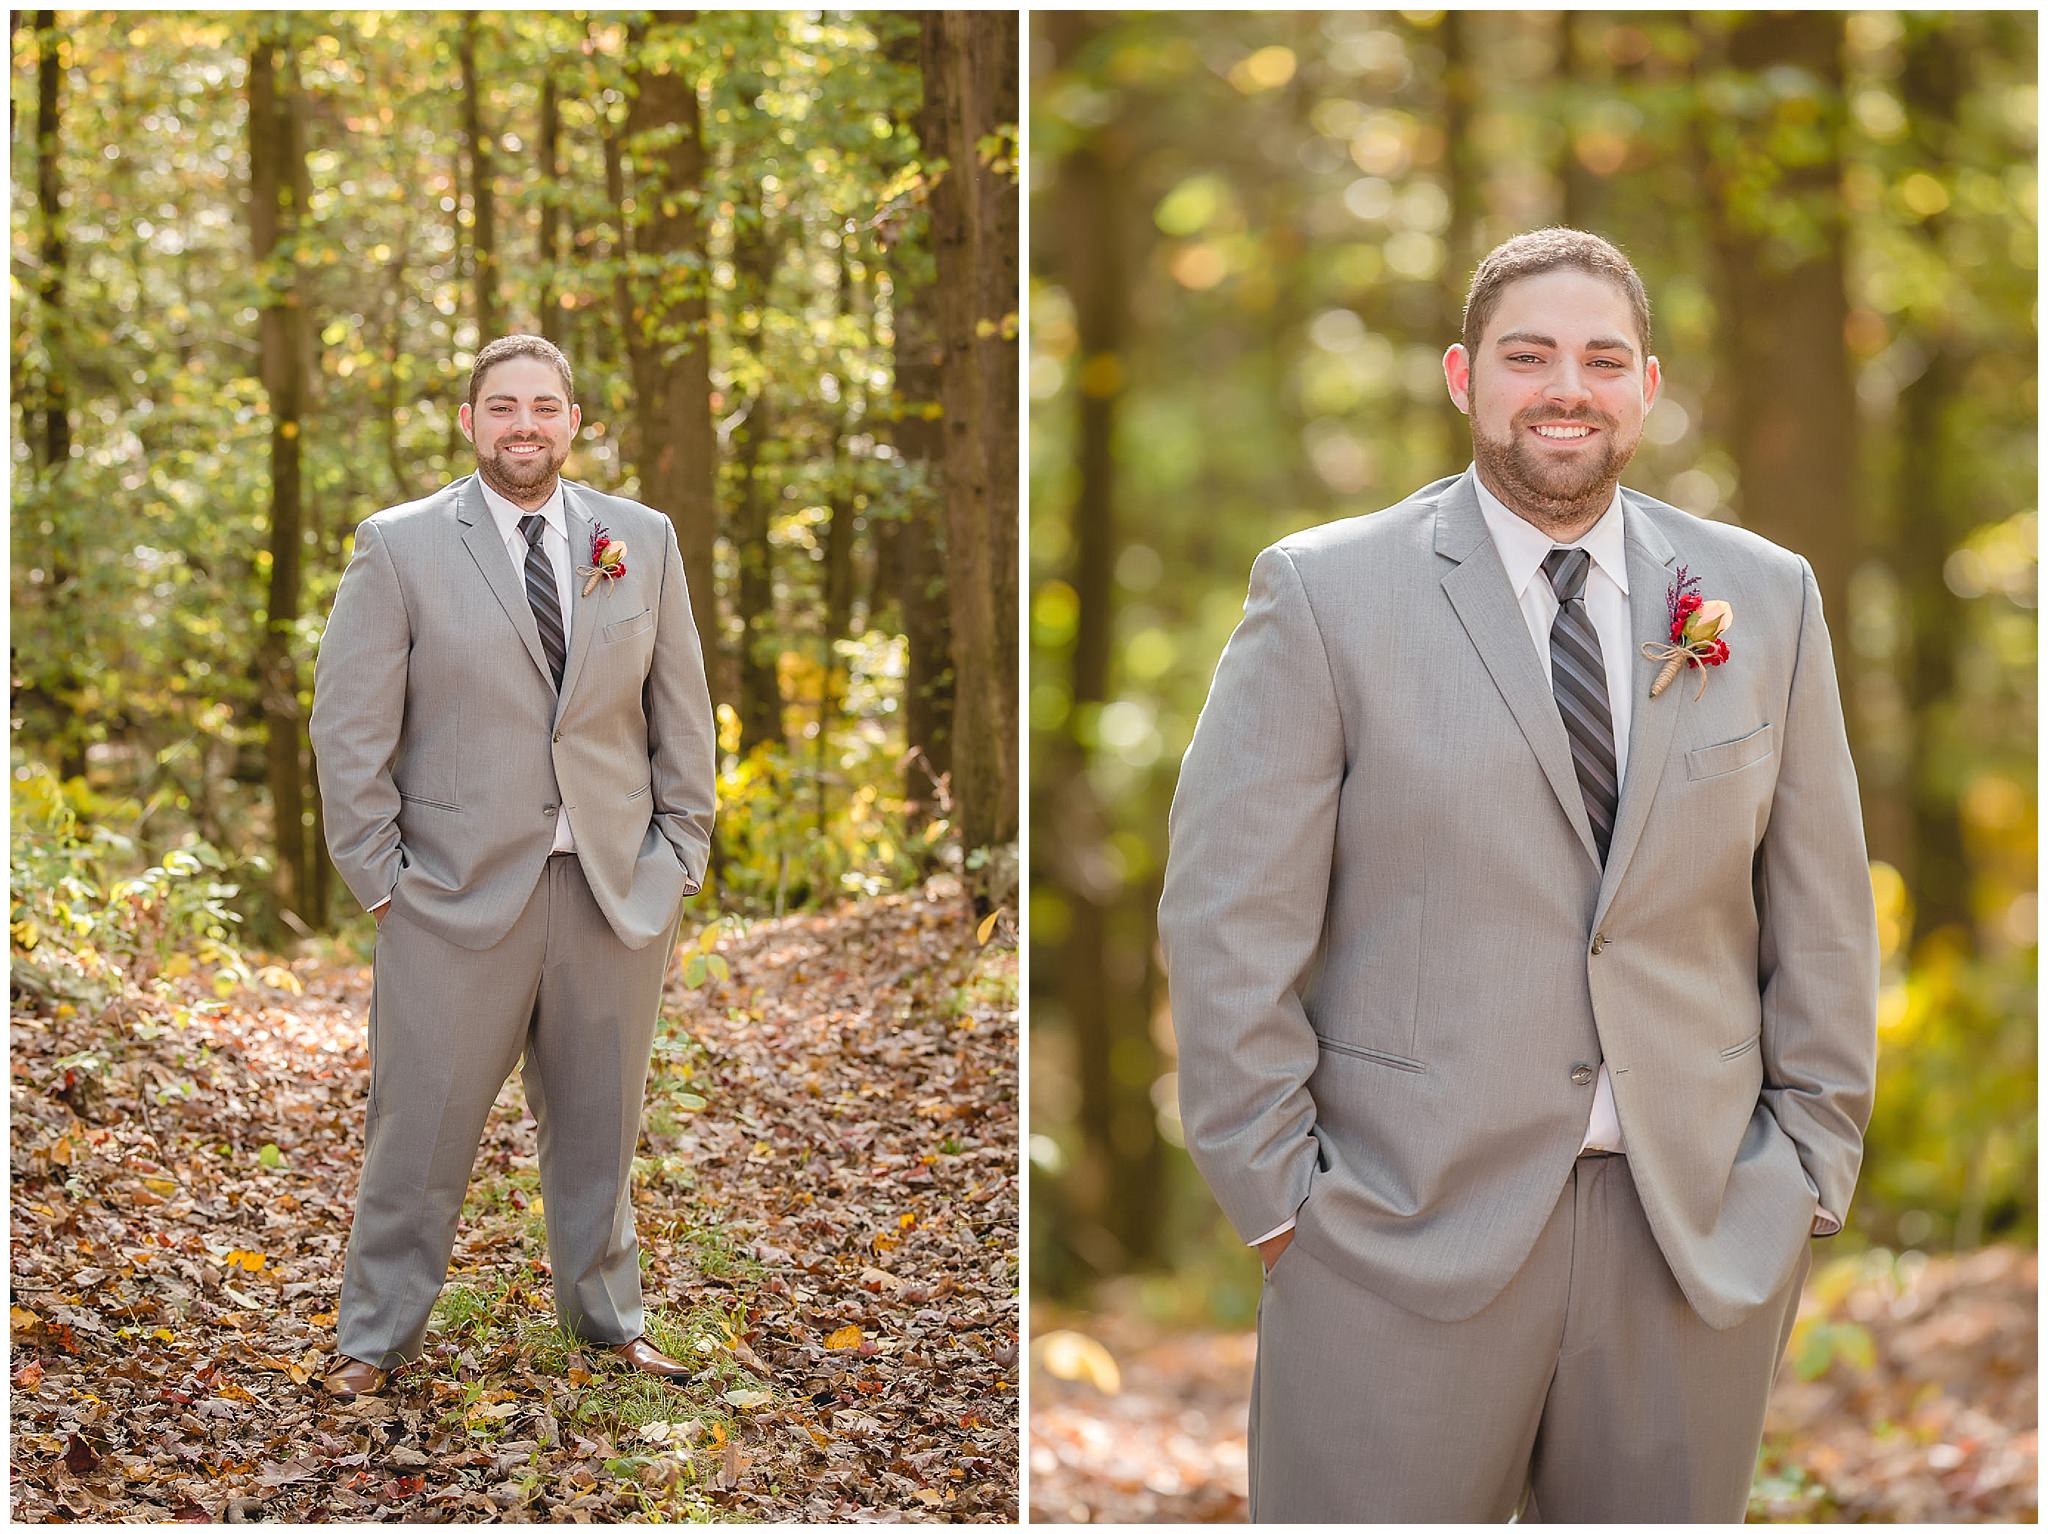 Groom portraits at the Barn at Soergel Hollow